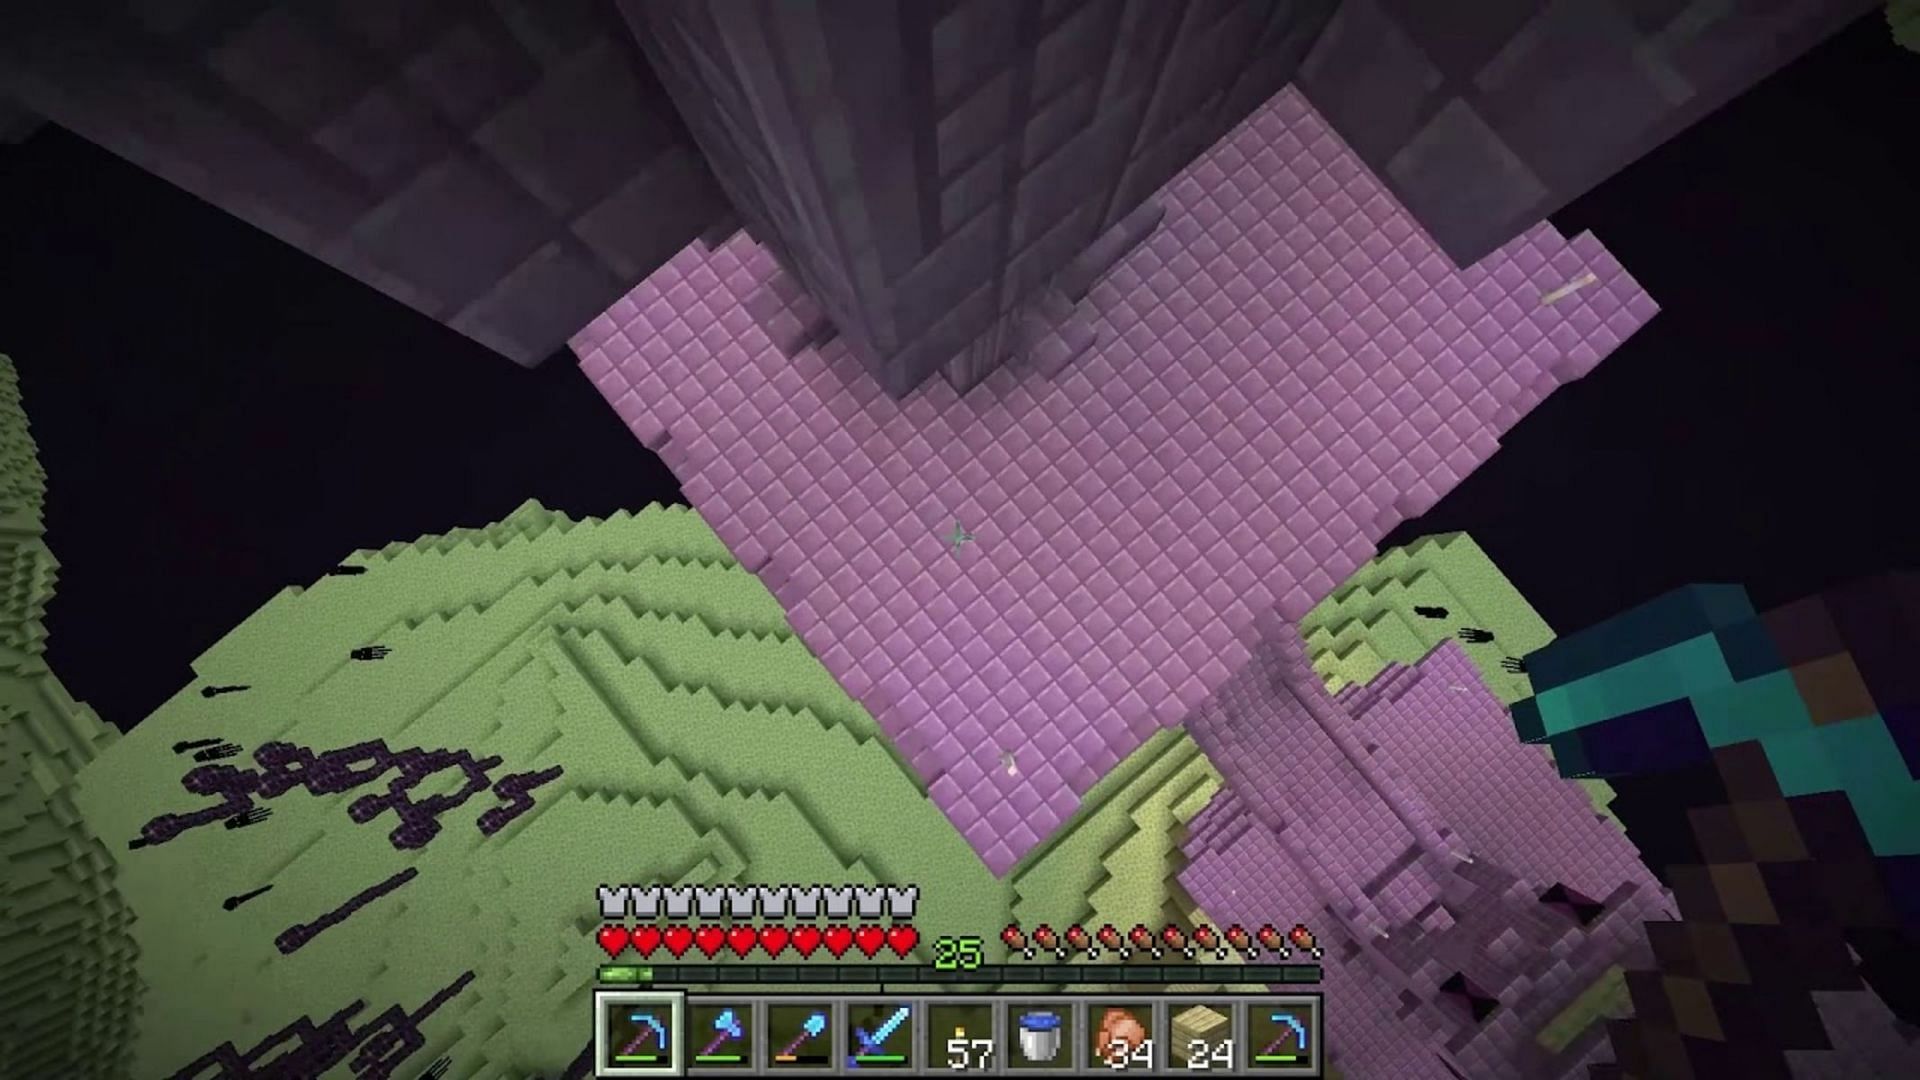 minecraft feather falling